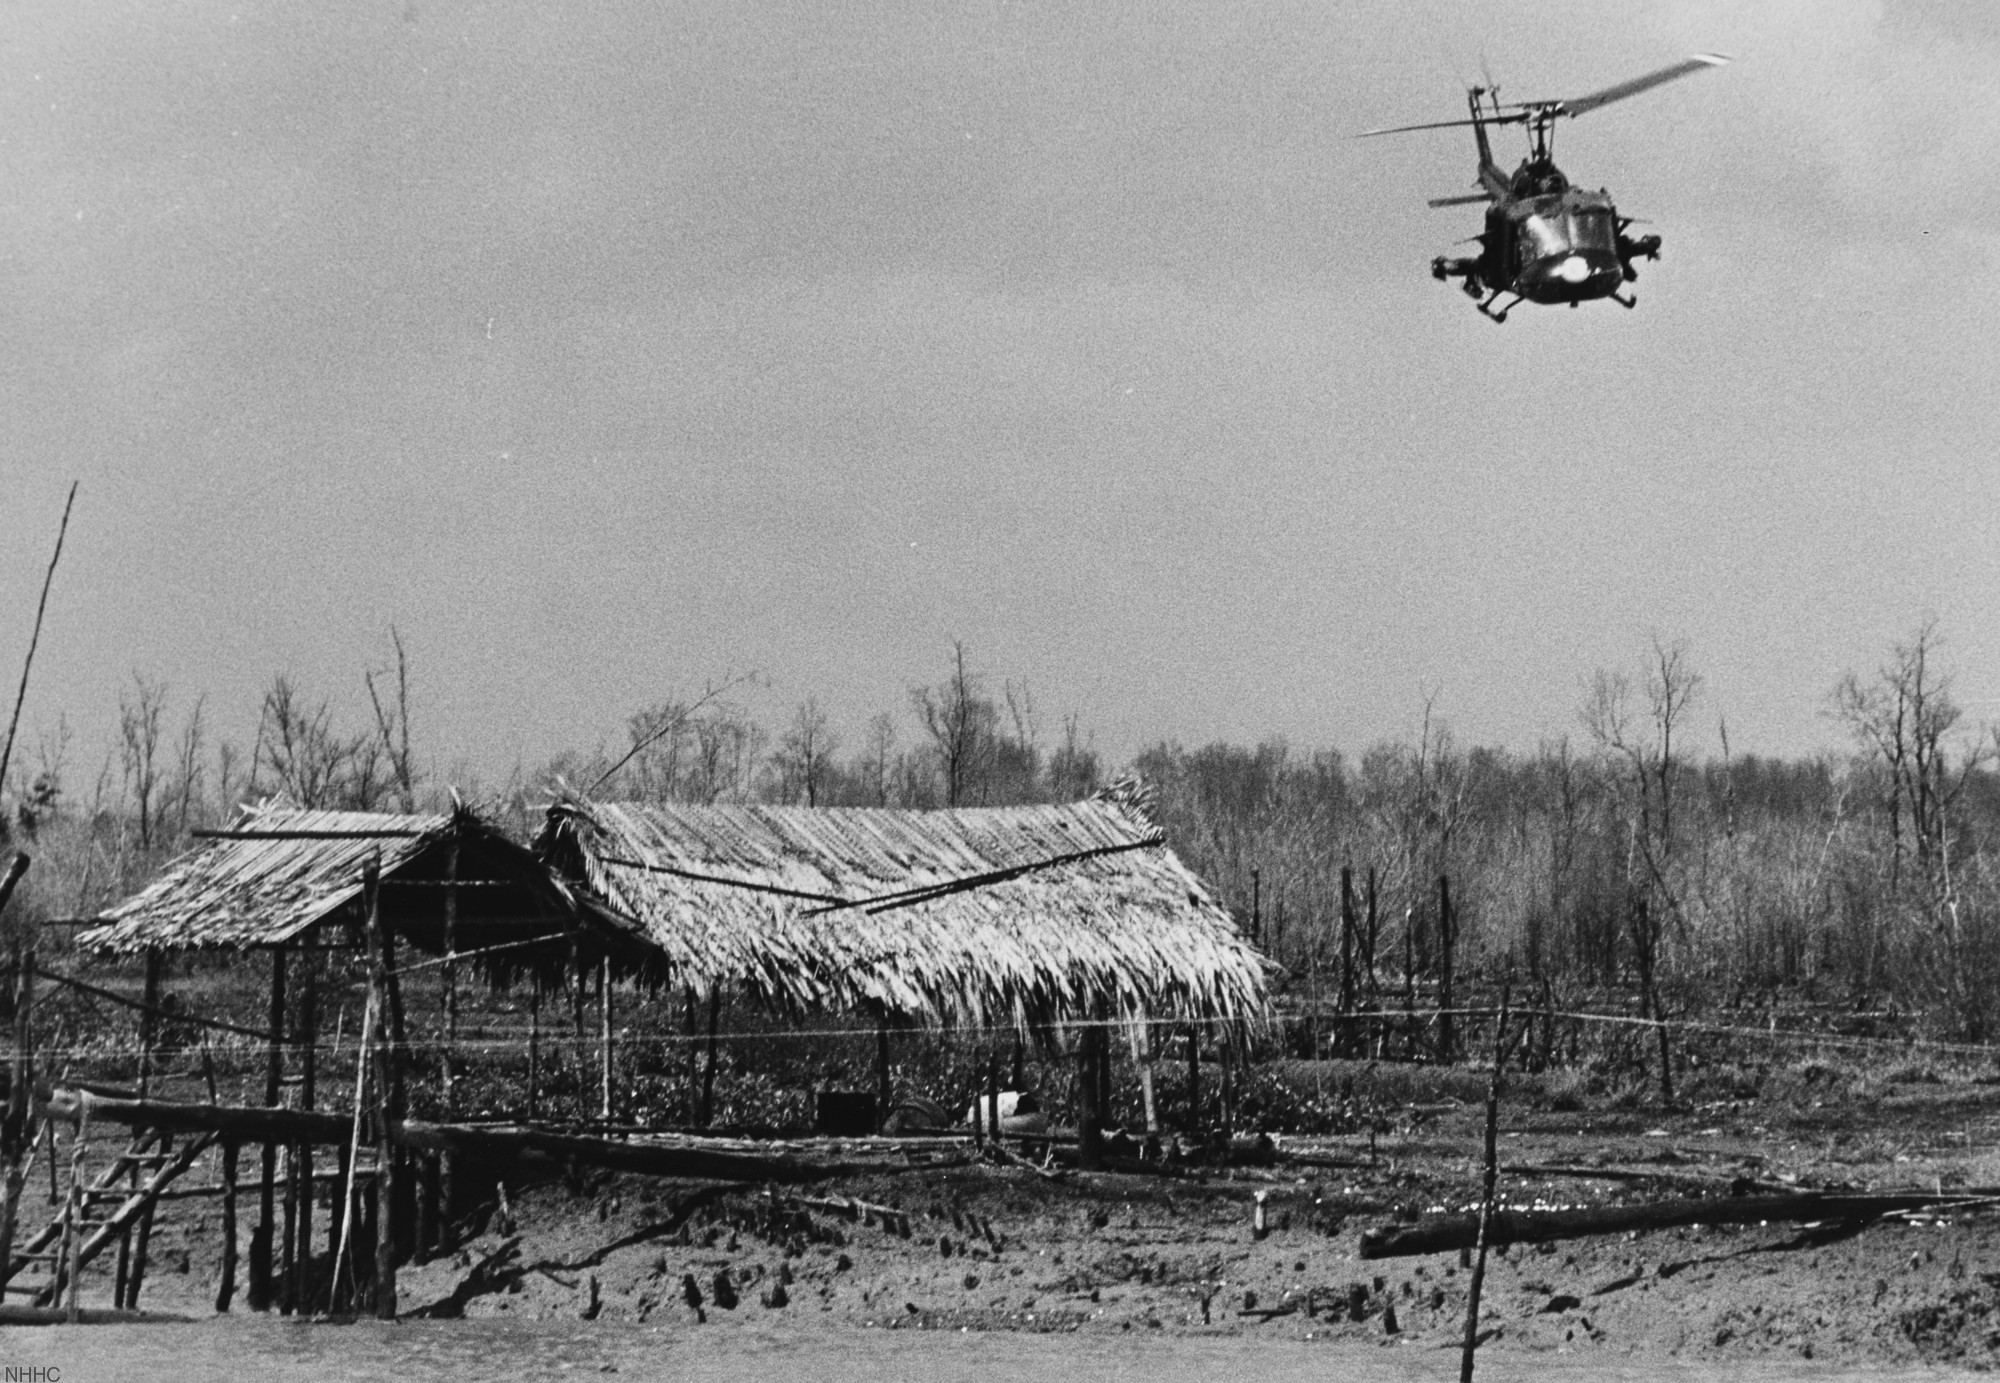 hal-3 seawolves helicopter attack squadron light us navy uh-1 huey 14 vietnam war